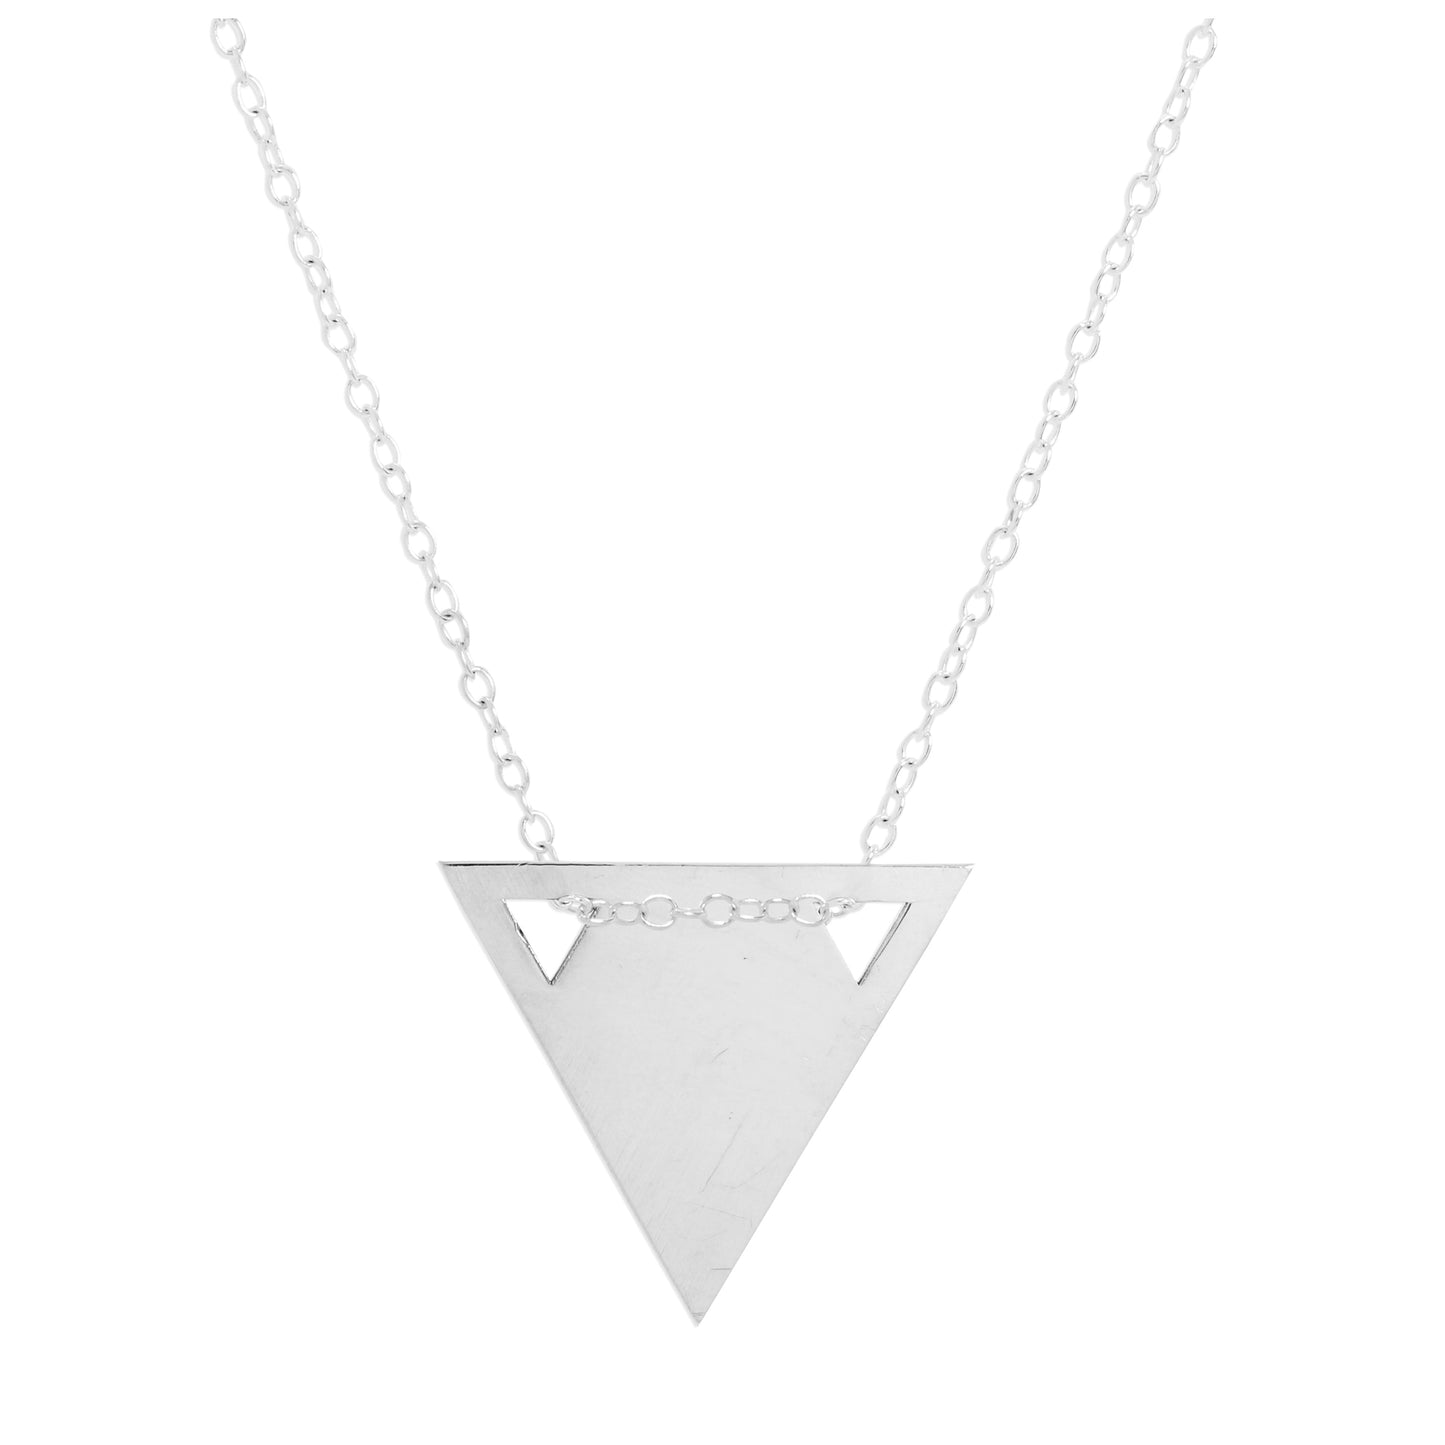 Sterling Silver Engravable Flat Triangle Pendant Necklace 14 - 22 Inches